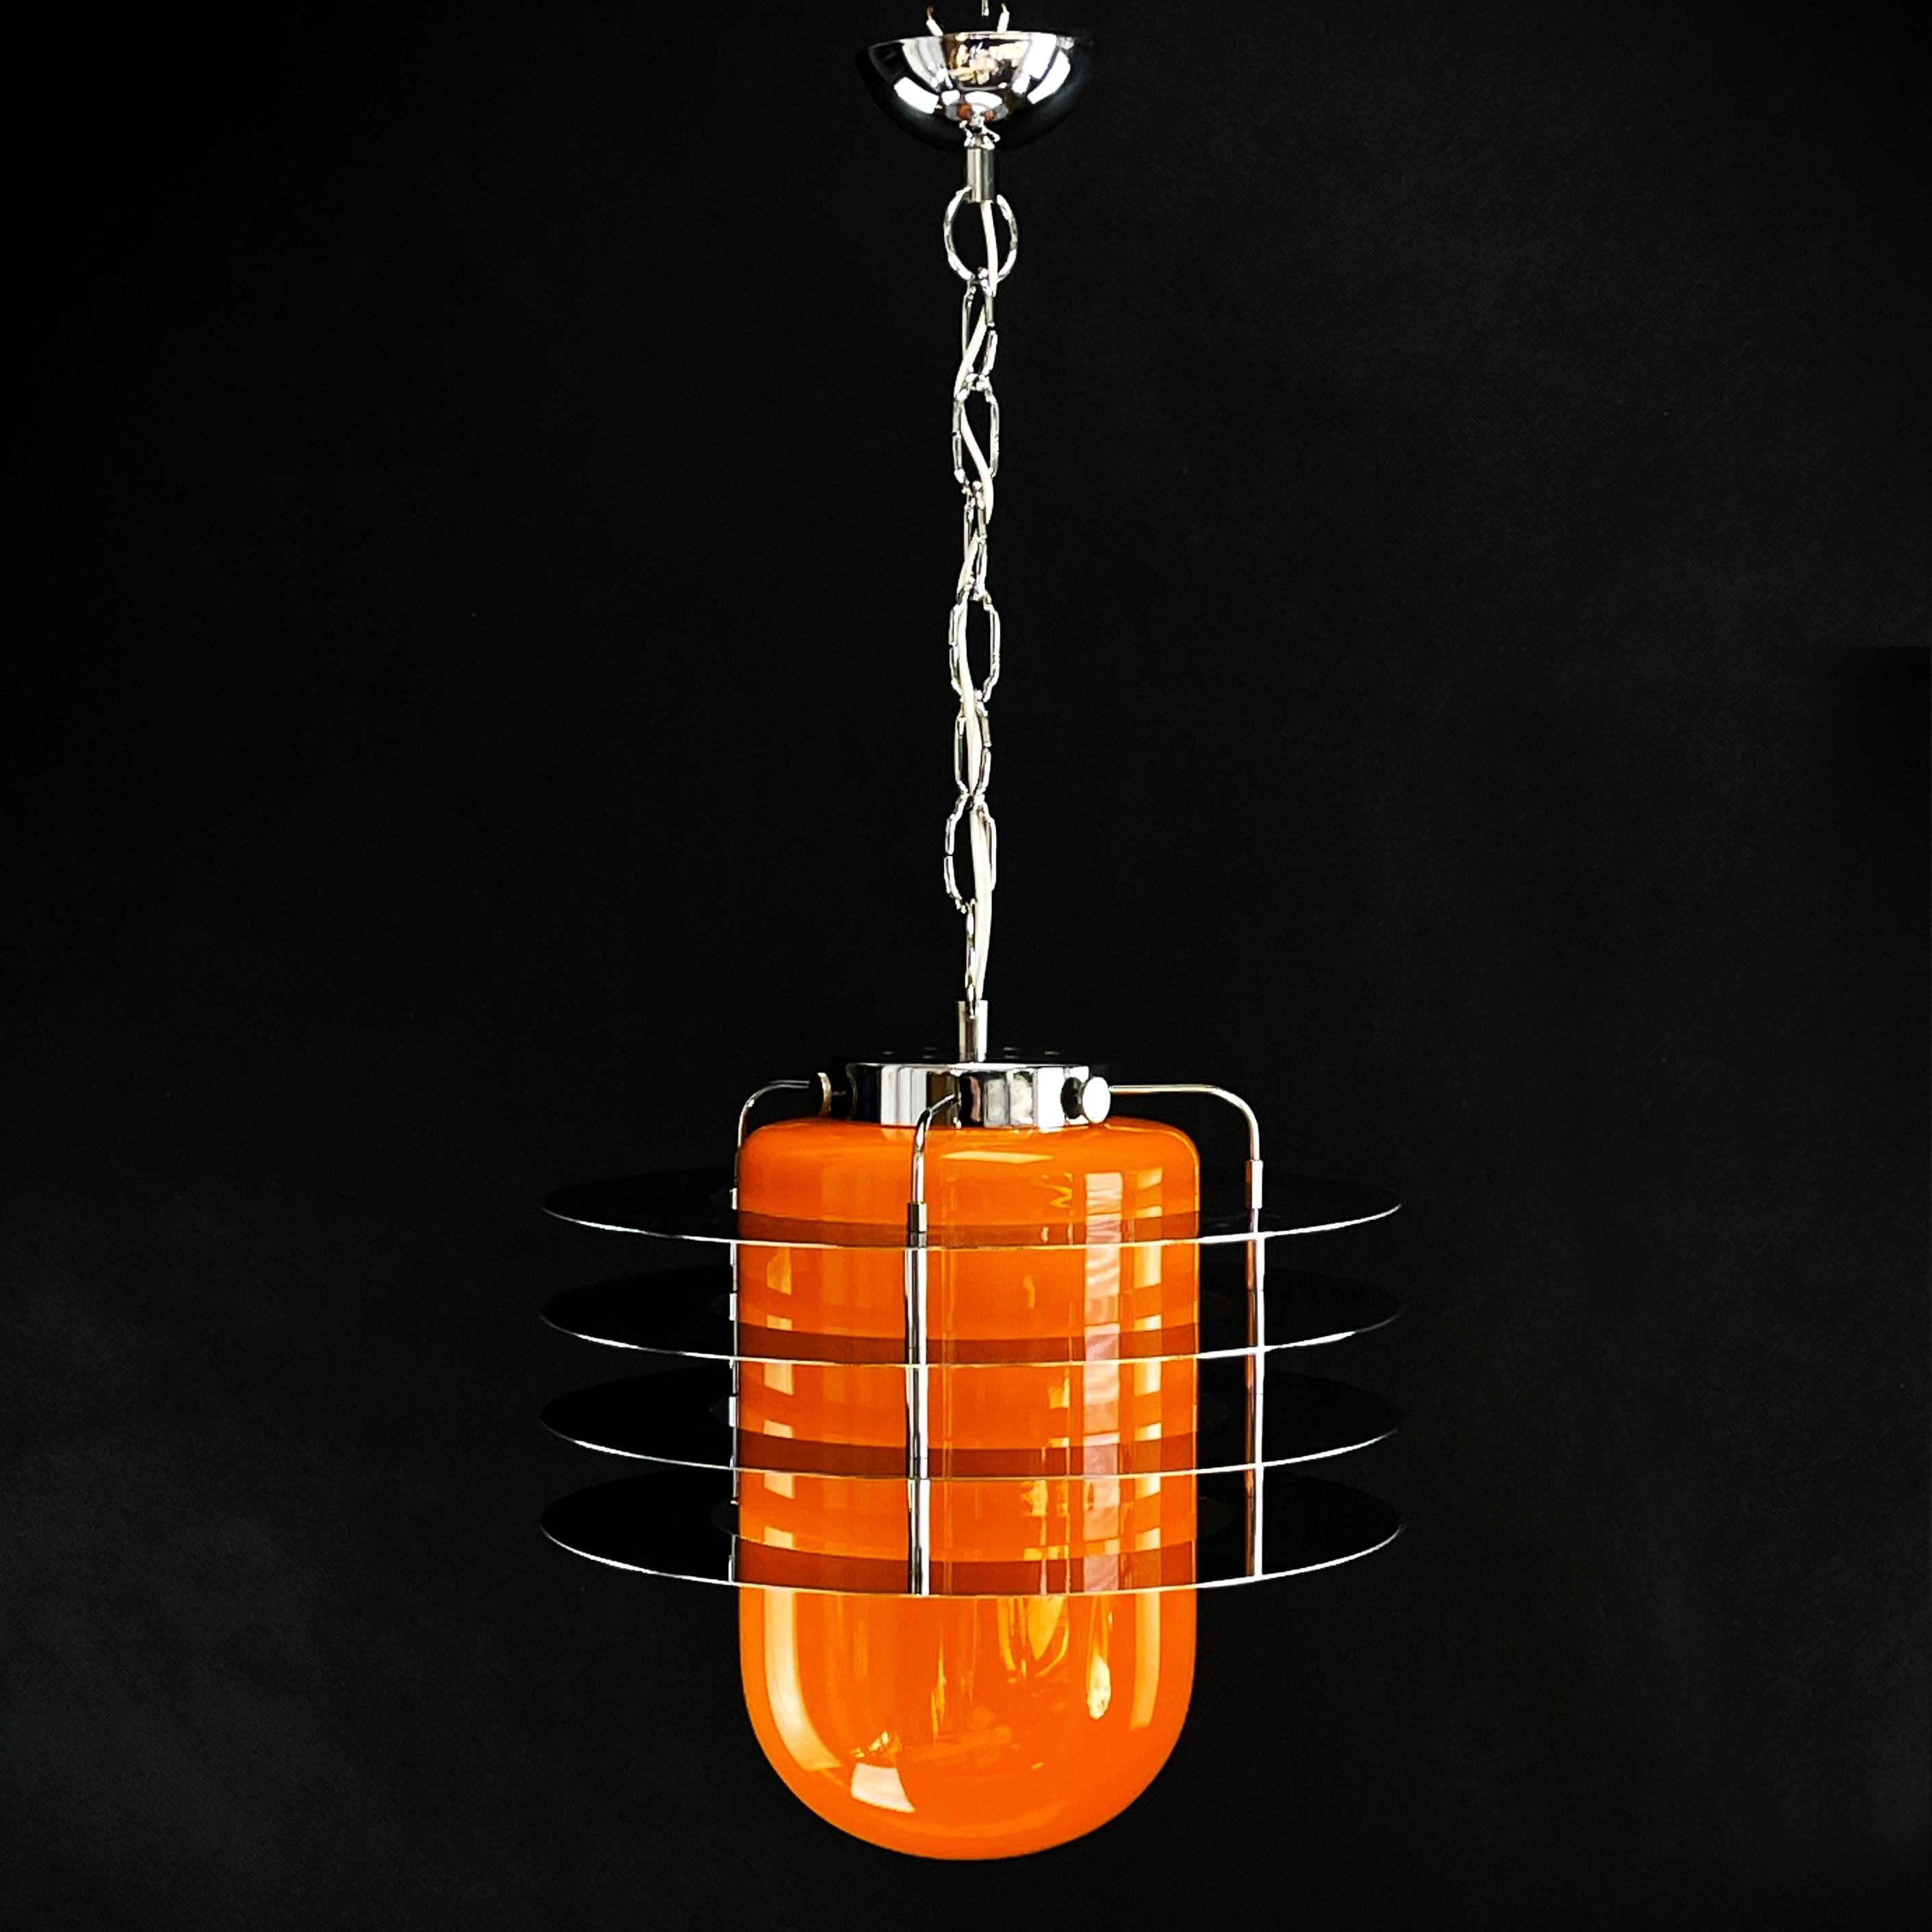 Orange Space Age ceiling lamp - 1970s

The 1970s space-age style lounge ceiling lamp is a fascinating vintage piece that will give your room a retro-futuristic atmosphere. With its unique design and striking color accents, it is a real eye-catcher